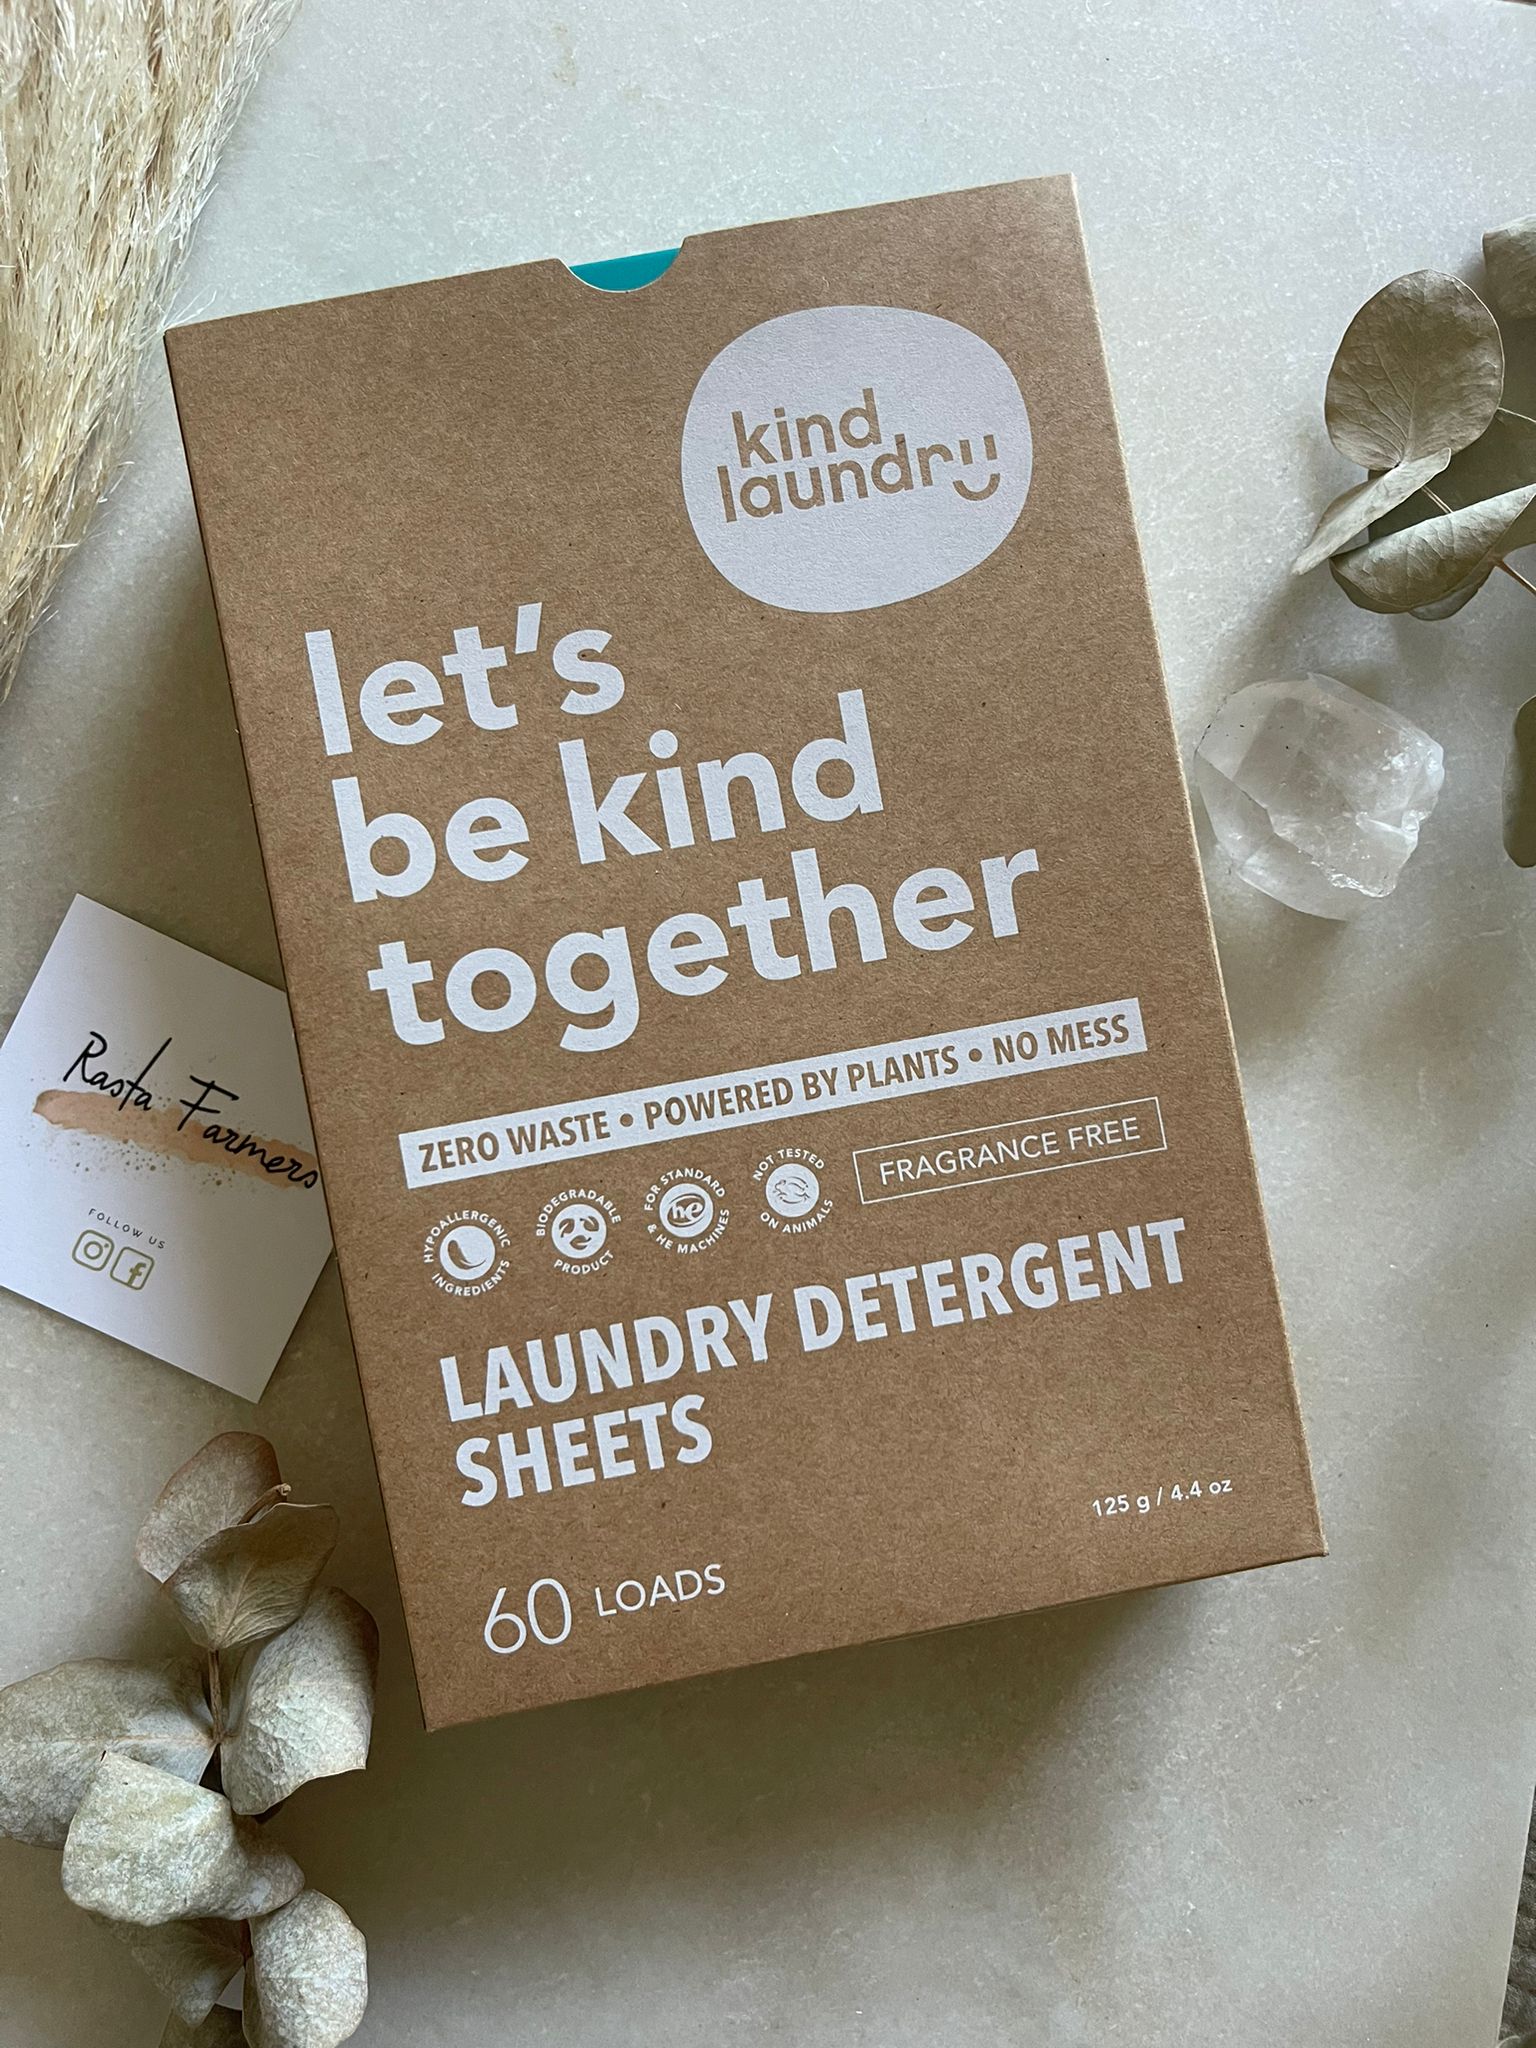 Kind Laundry - Laundry Detergent Sheets - 60 Washes - Fragrance Free